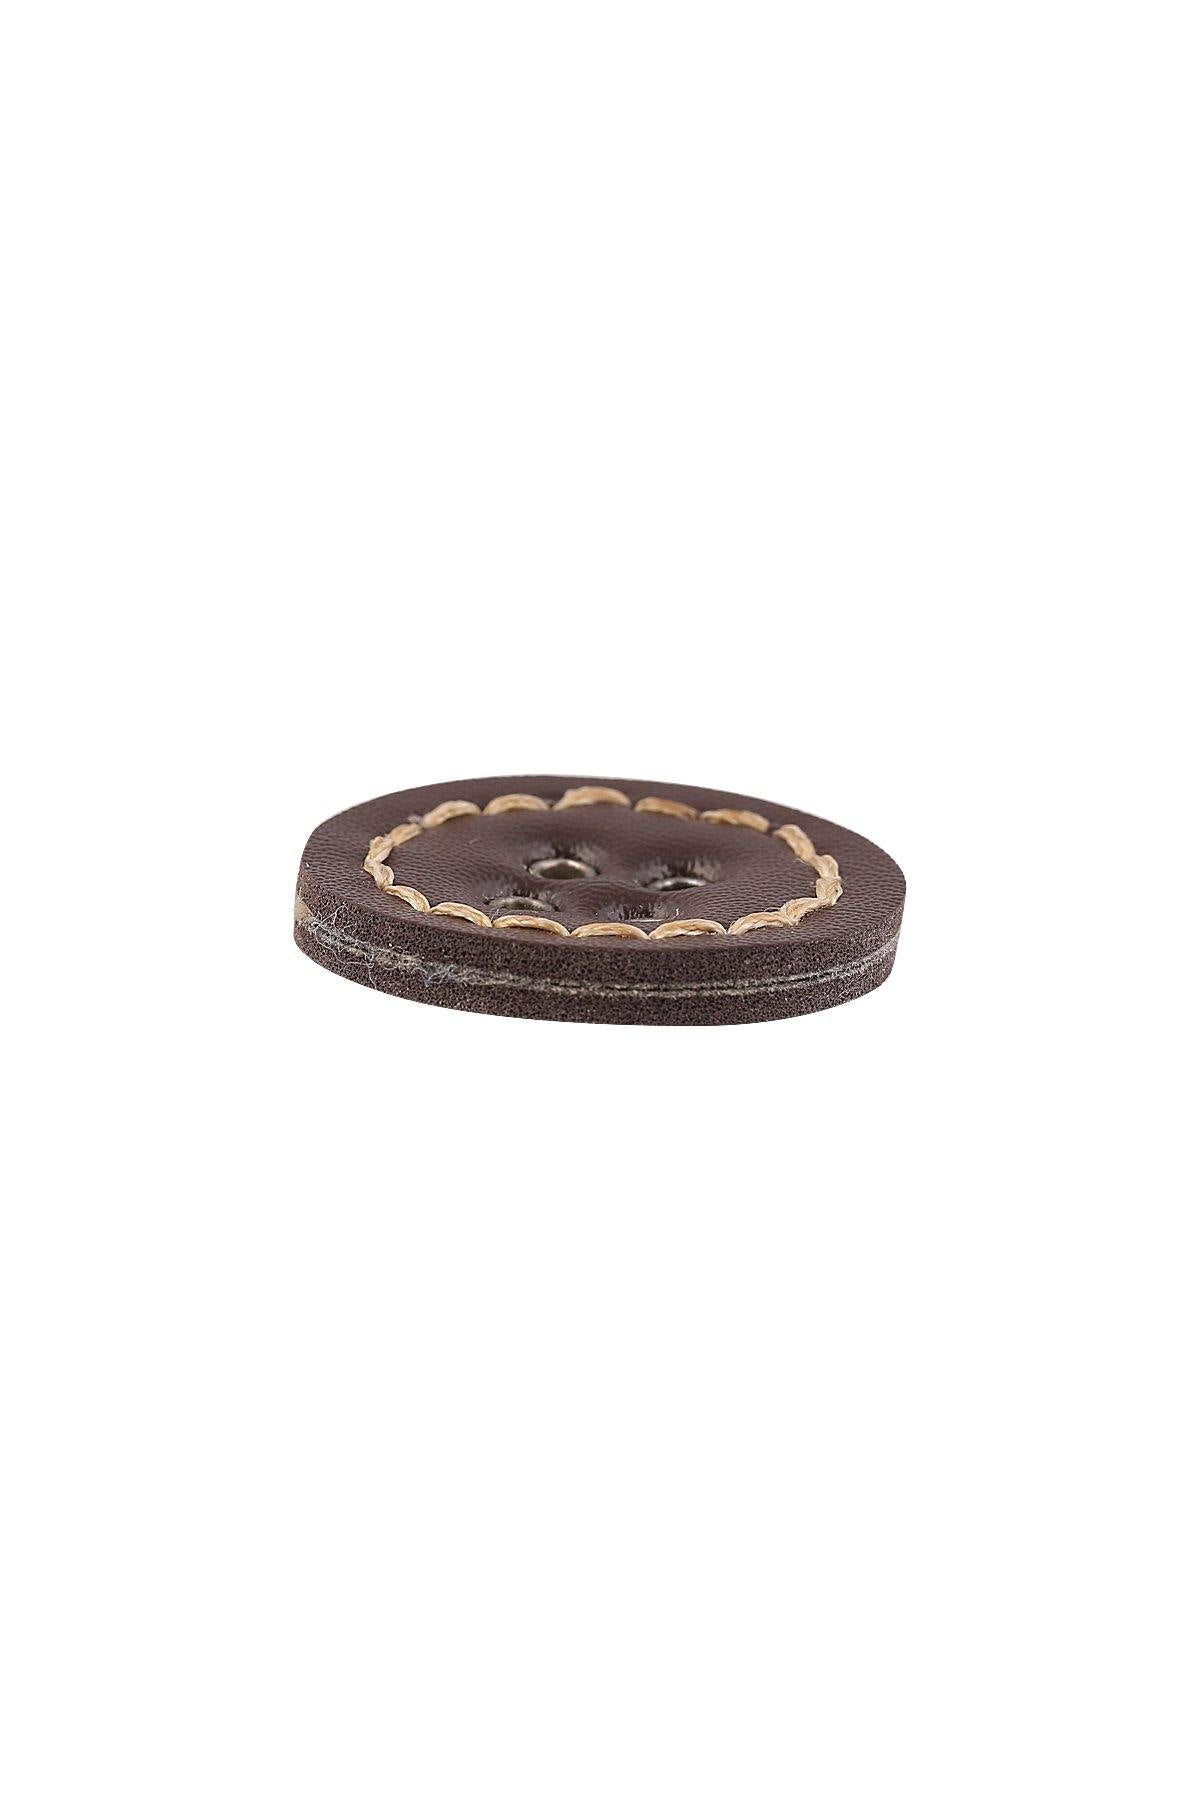 Black & Brown 4 Eyelet Hole Stitched Leather Button - Jhonea Accessories